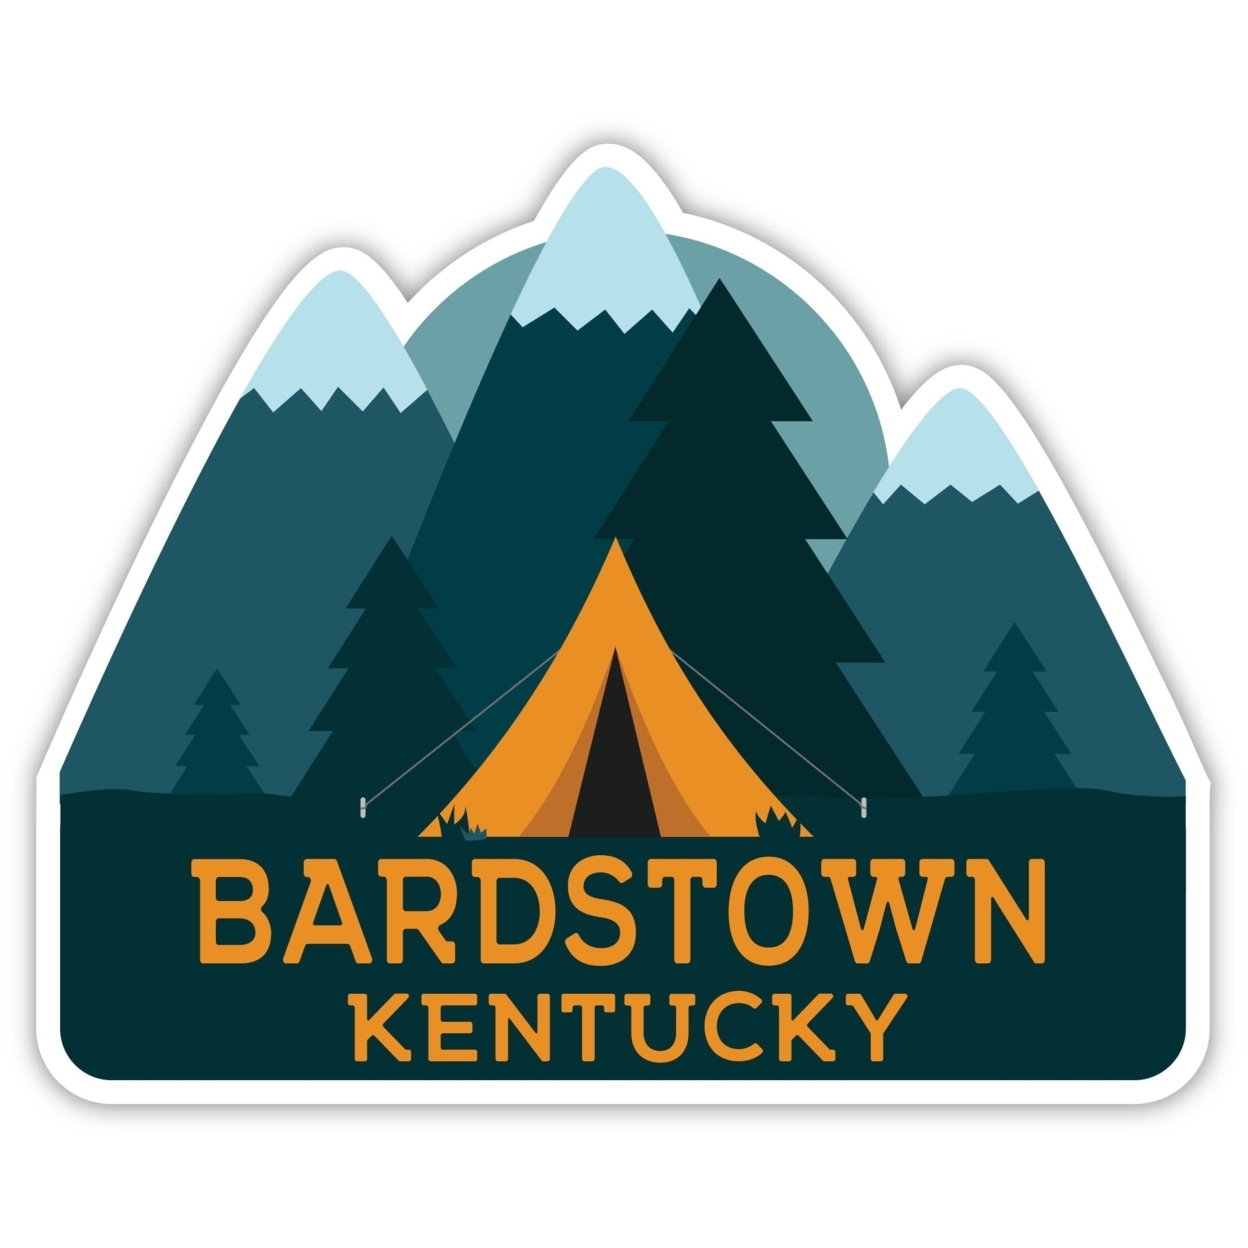 Bardstown Kentucky Souvenir Decorative Stickers (Choose Theme And Size) - 4-Pack, 4-Inch, Tent